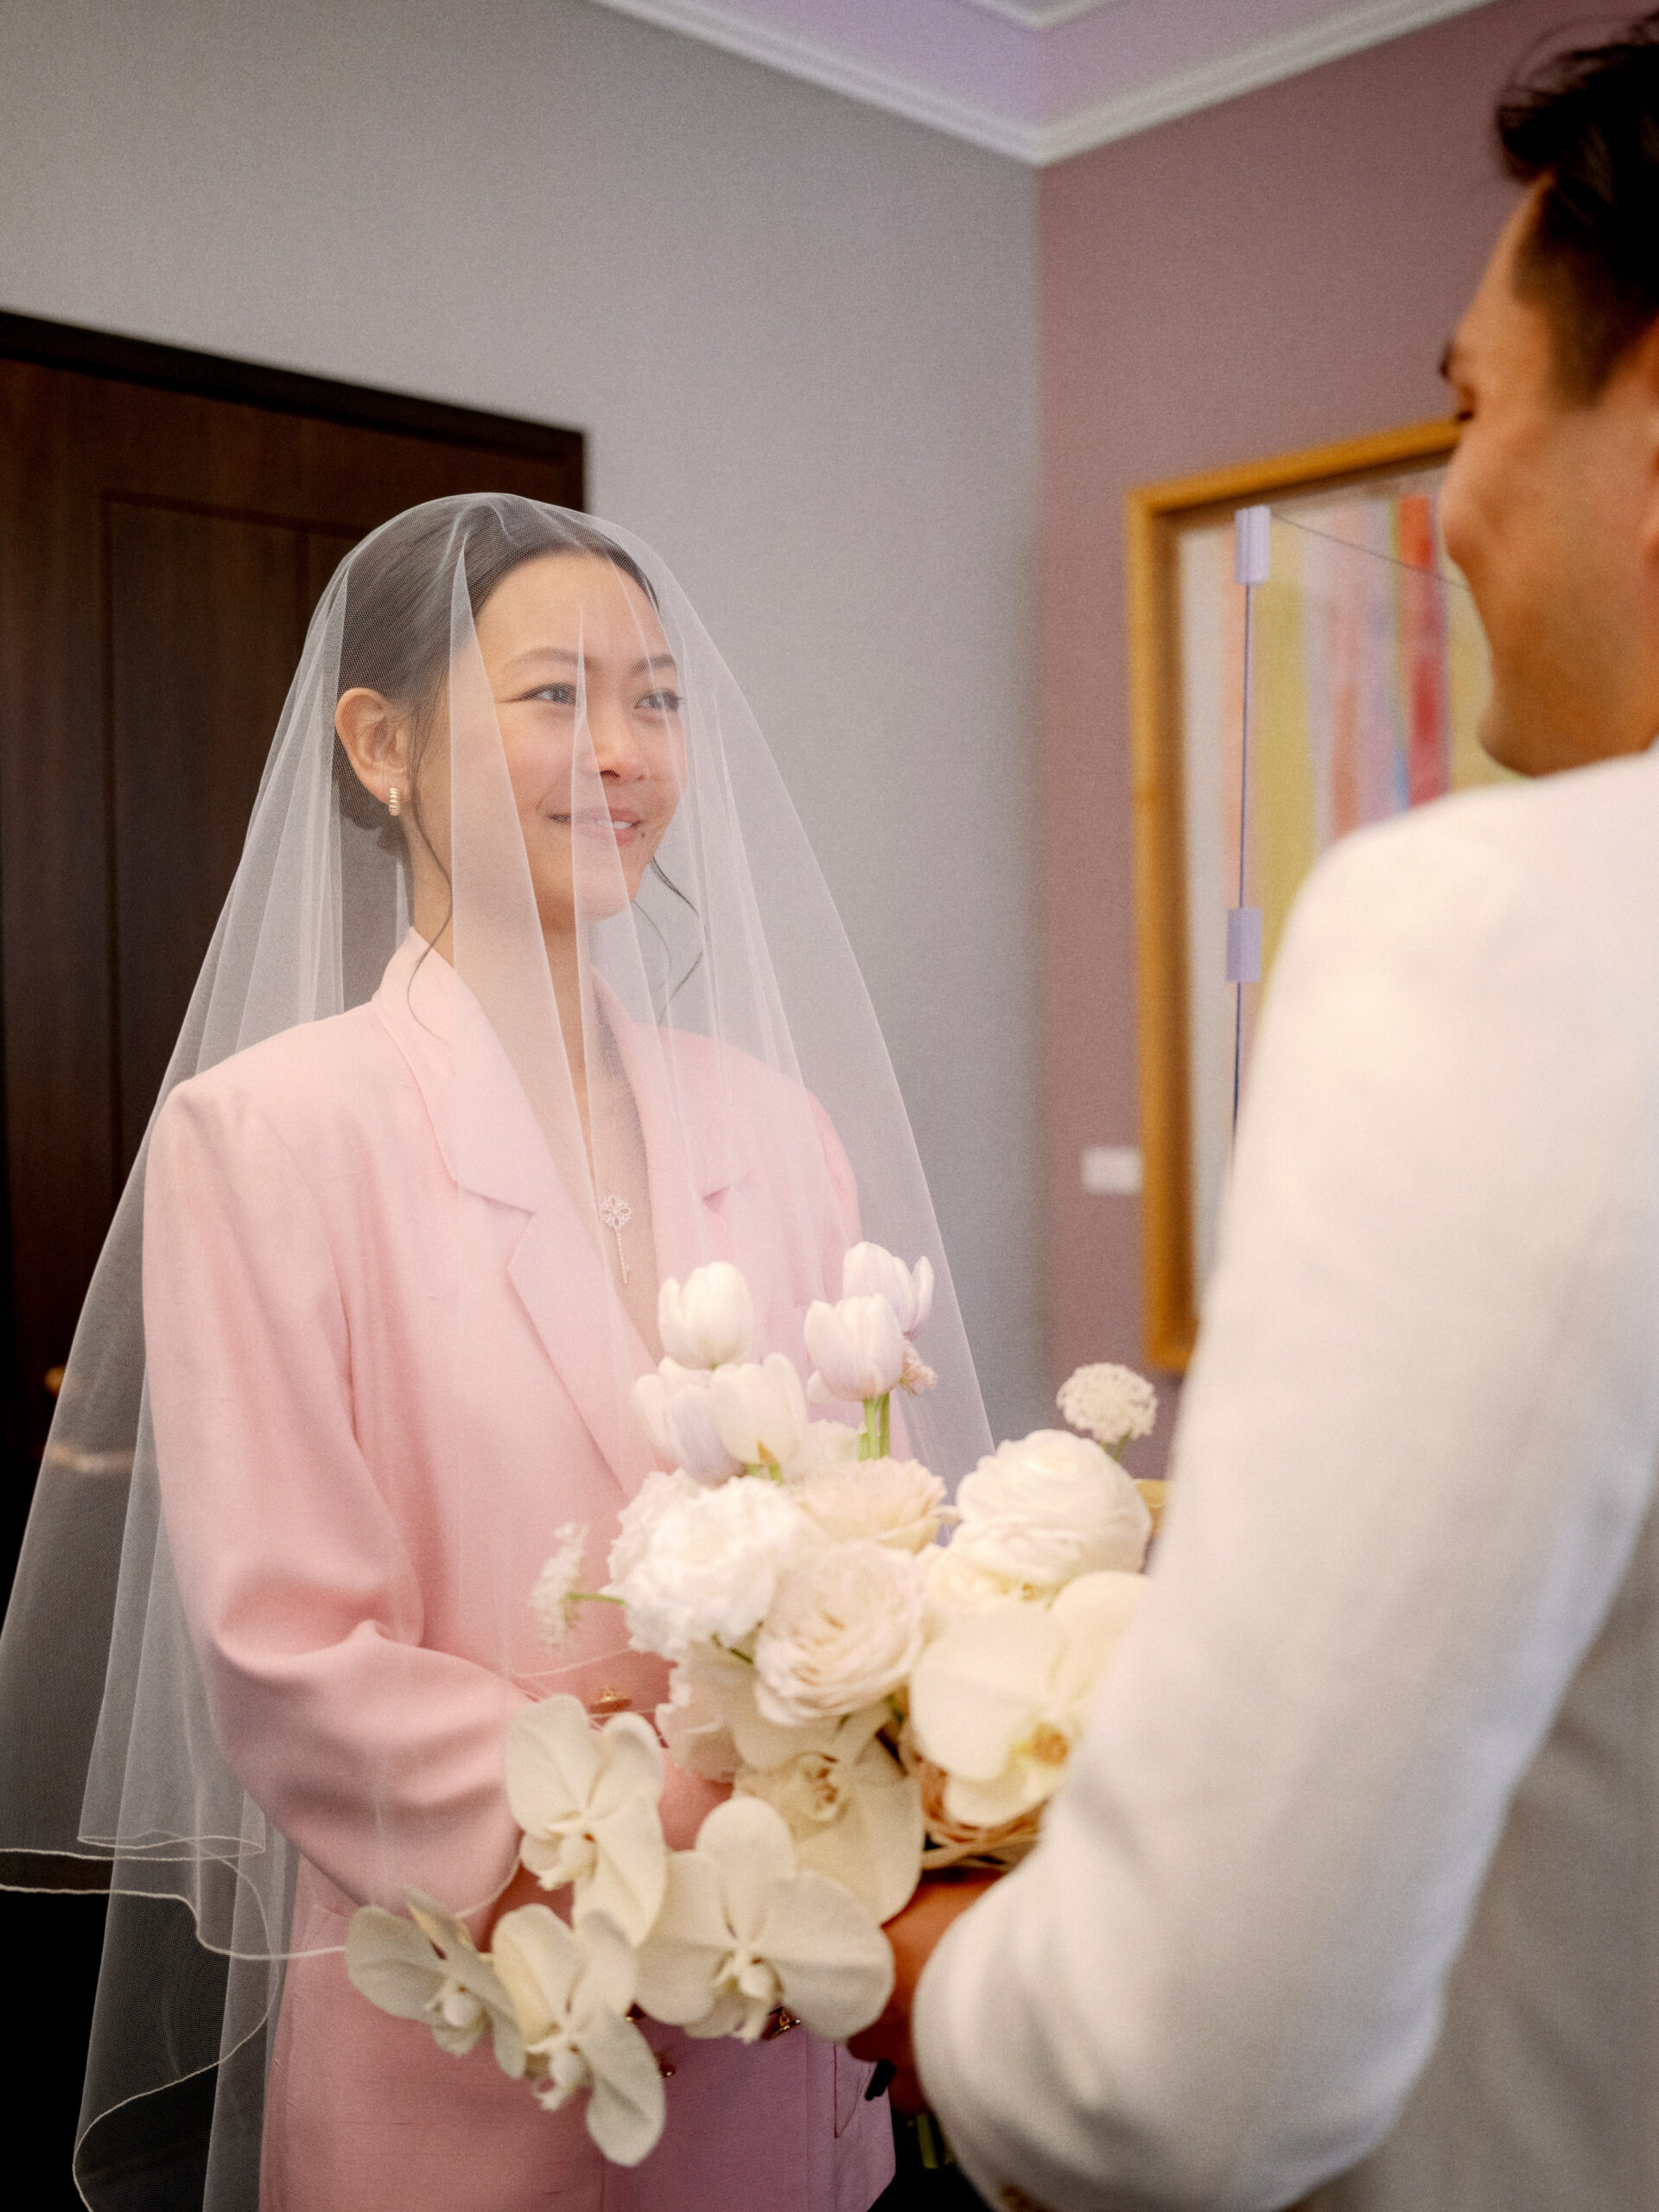 The bride is smiling while looking at the groom during the wedding ceremony at NYC. Documentary Wedding Photography Image by Jenny Fu Studio